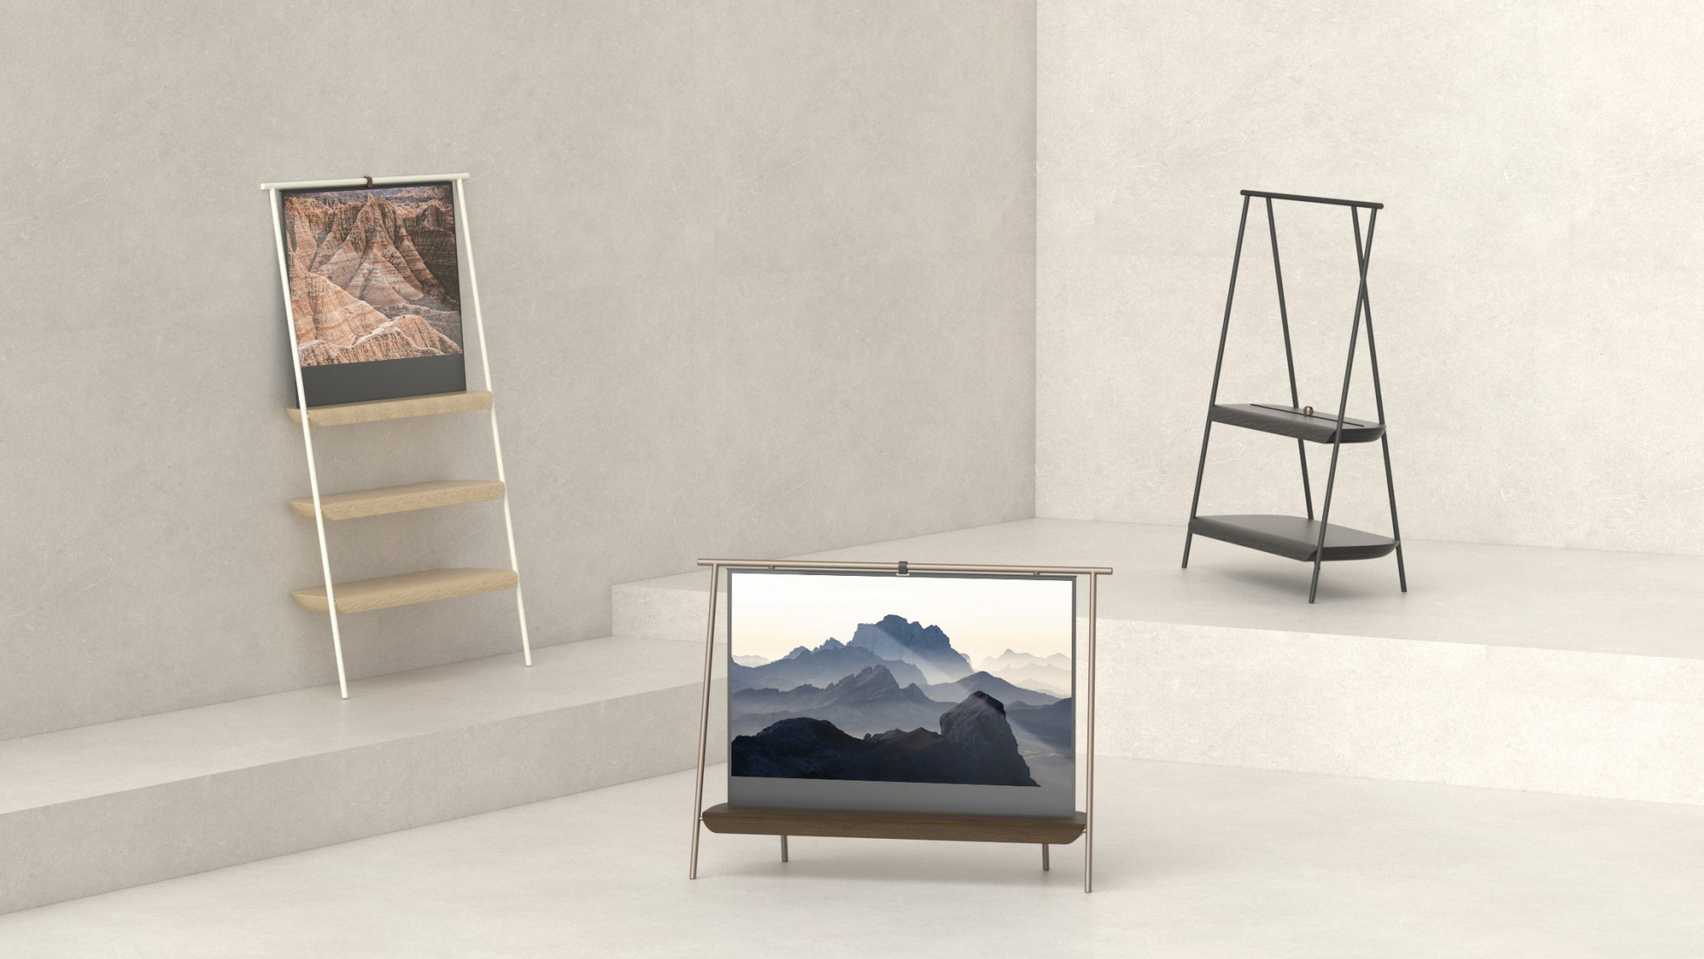 Trestle by Richard Bone shelf with embedded rolled OLED screen for the Dezeen and LG OLED Go competition